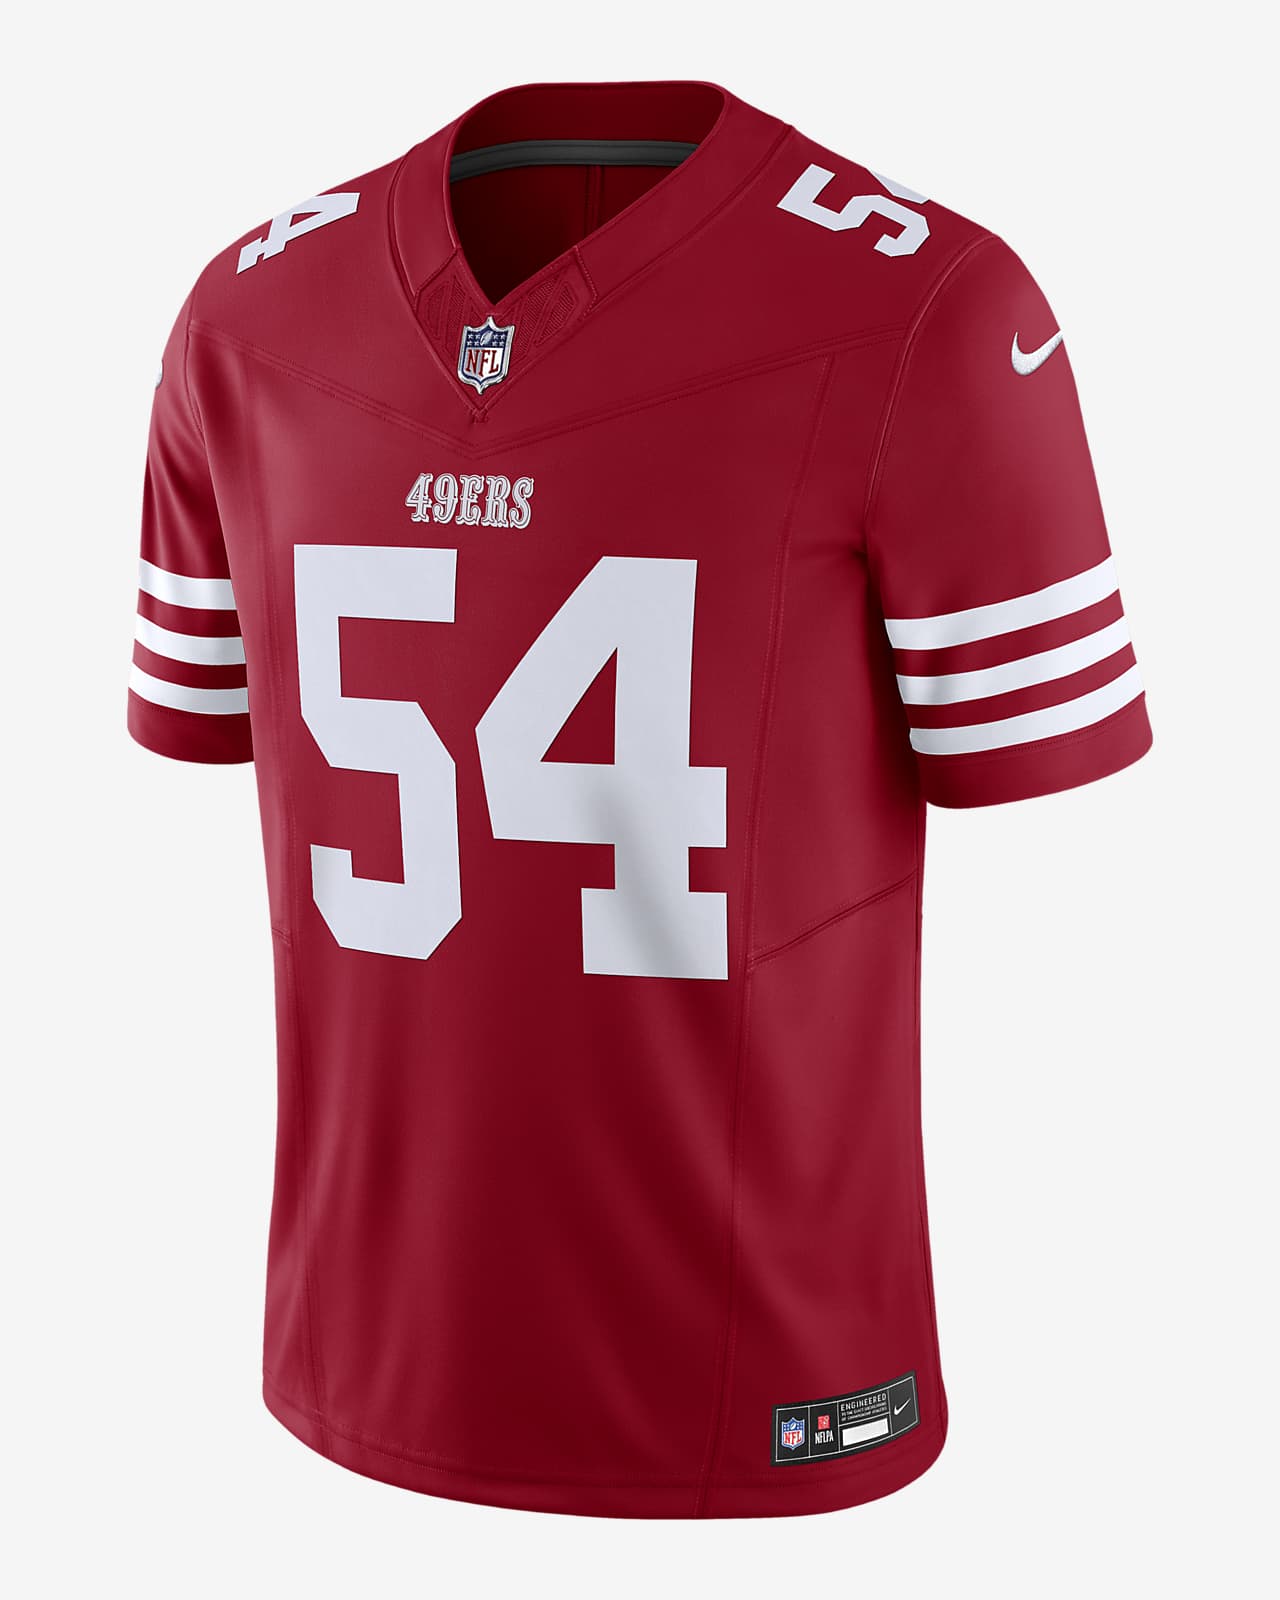 Christian McCaffrey San Francisco 49ers Nike Men's Dri-Fit NFL Limited Football Jersey in Red, Size: 3XL | 31NMSALH9BF-EZ1